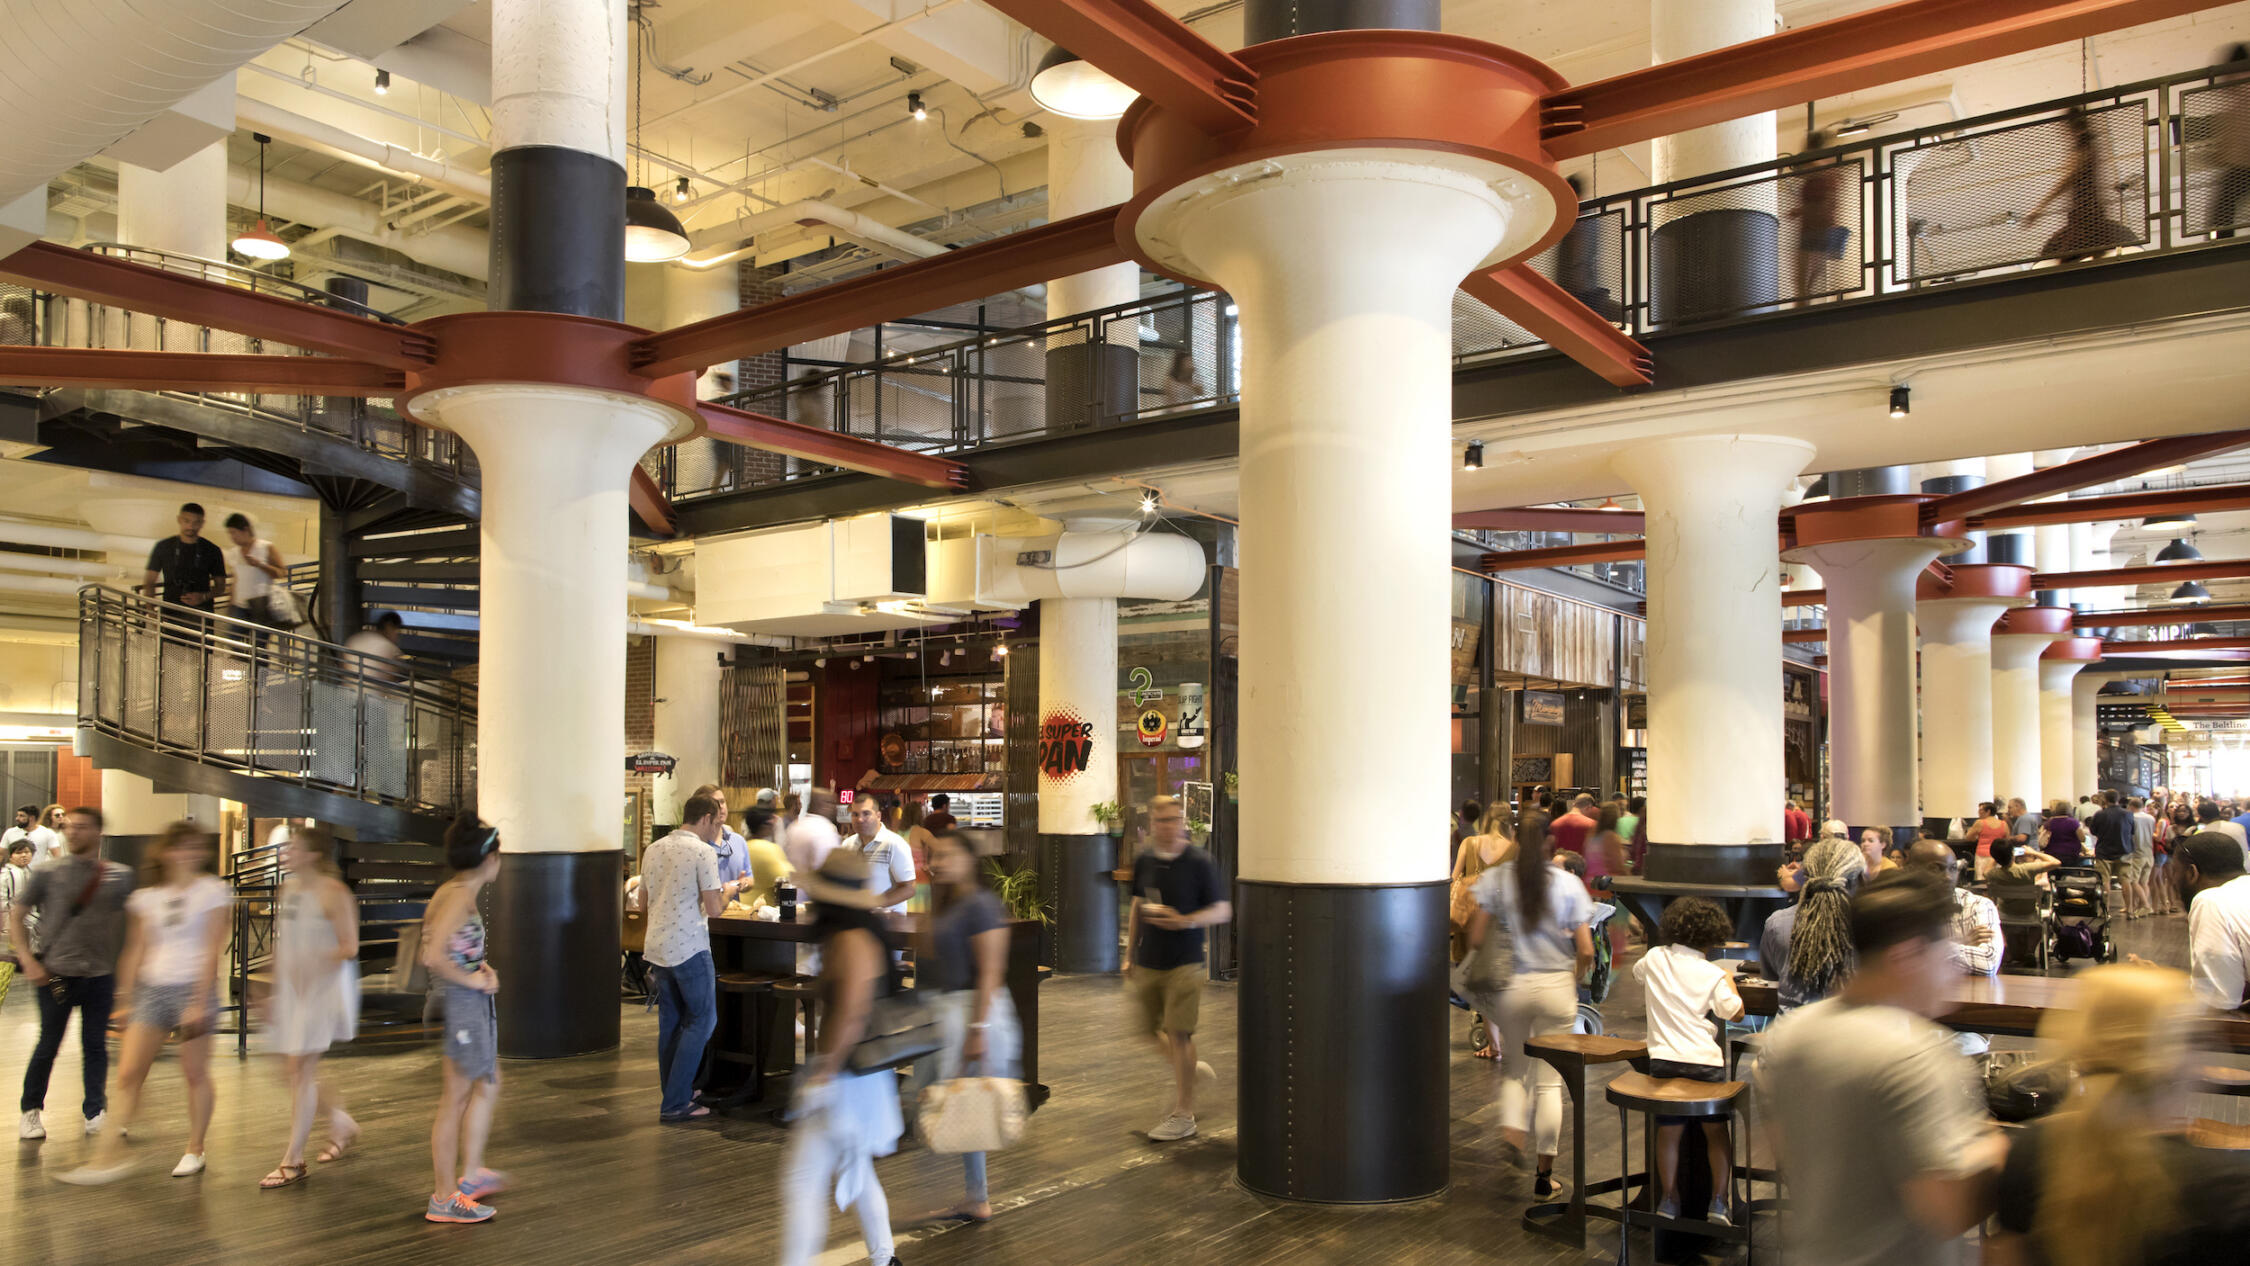 The lunch rush in the Central Food Hall of Ponce City Market